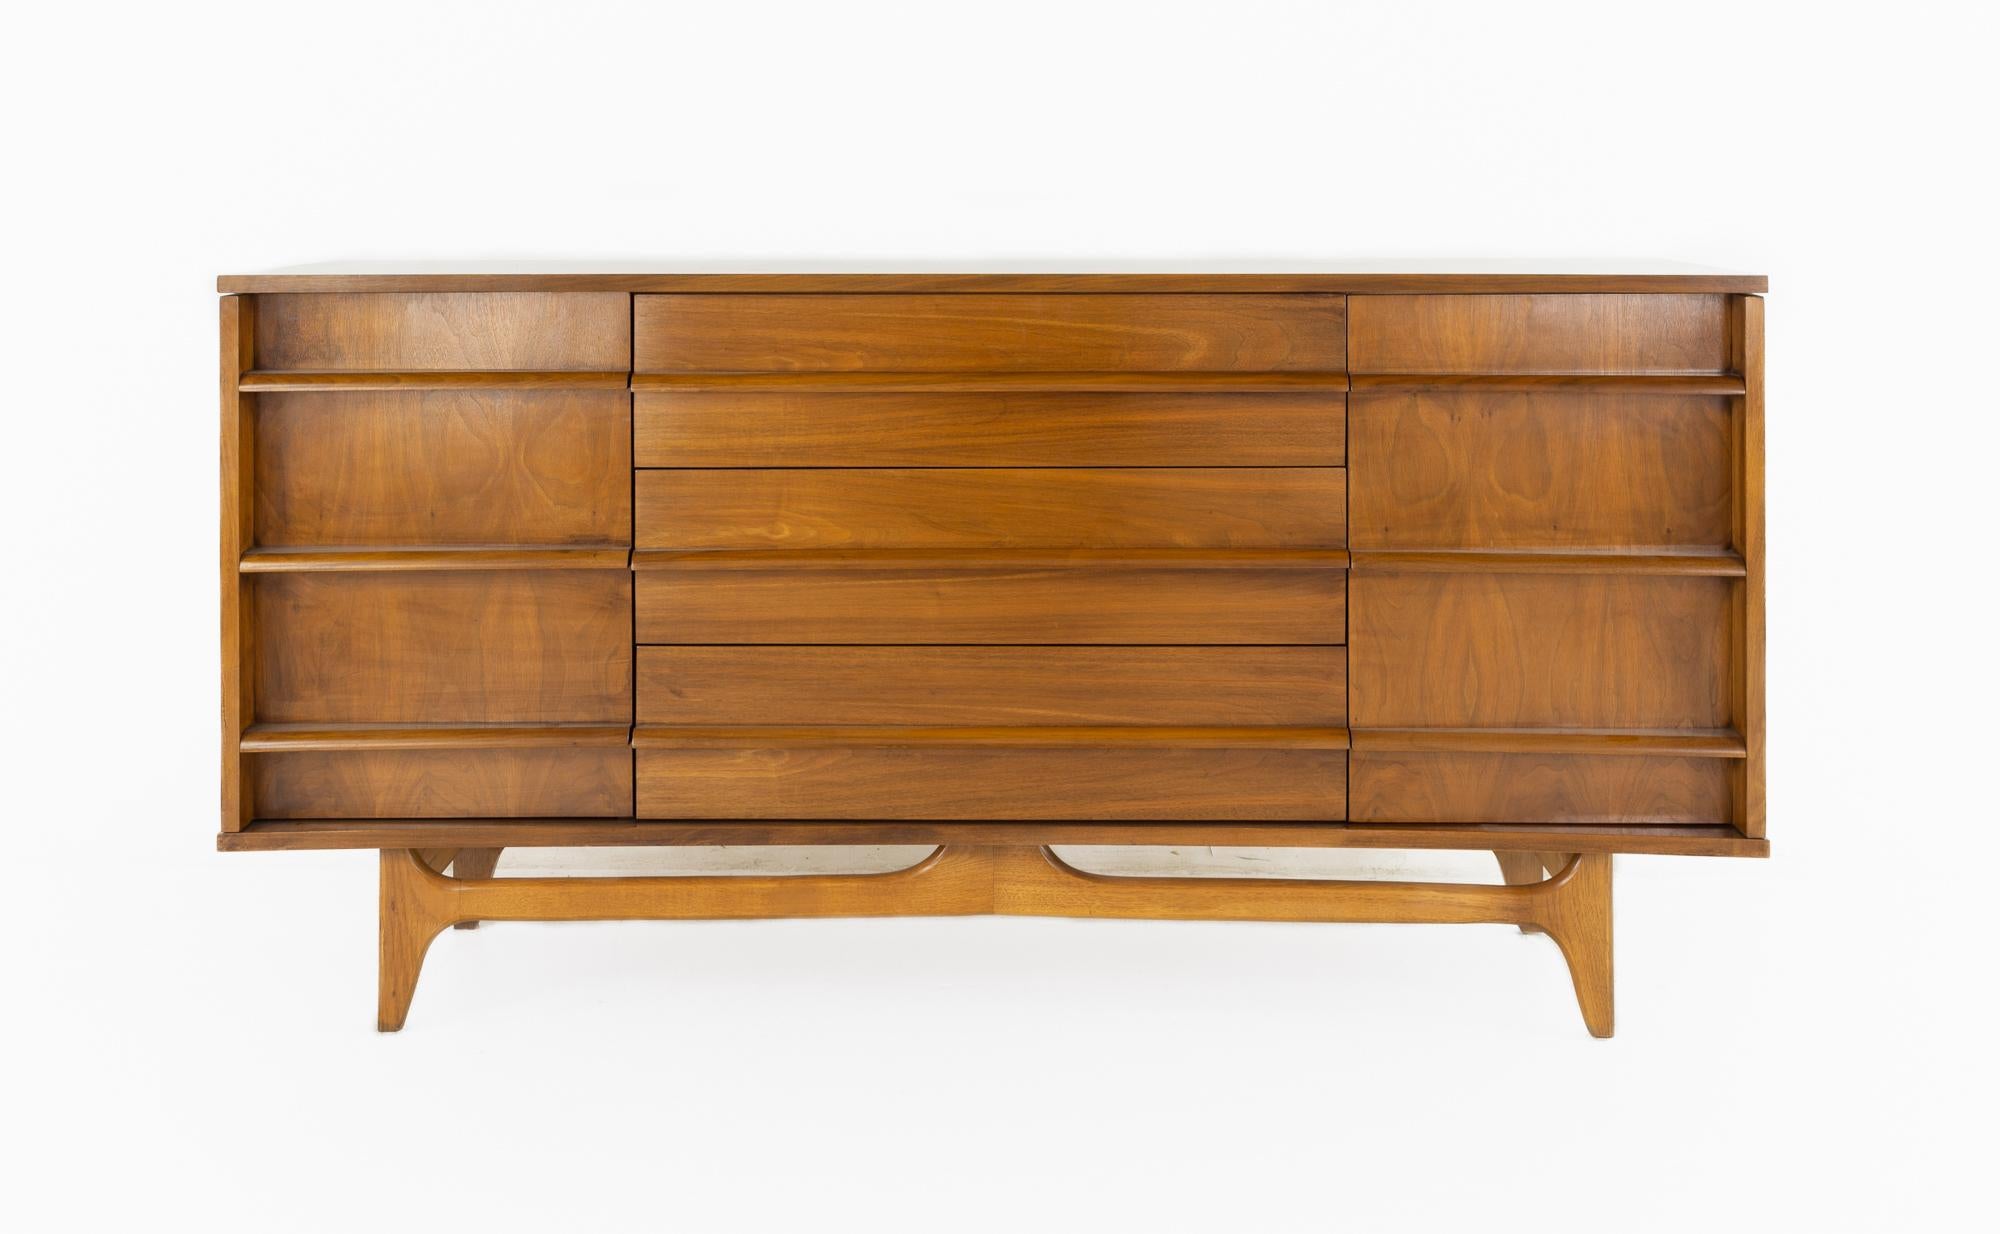 Young Manufacturing mid century buffet sideboard credenza

This buffet measures: 64 wide x 18 deep x 34 inches high

All pieces of furniture can be had in what we call restored vintage condition. That means the piece is restored upon purchase so